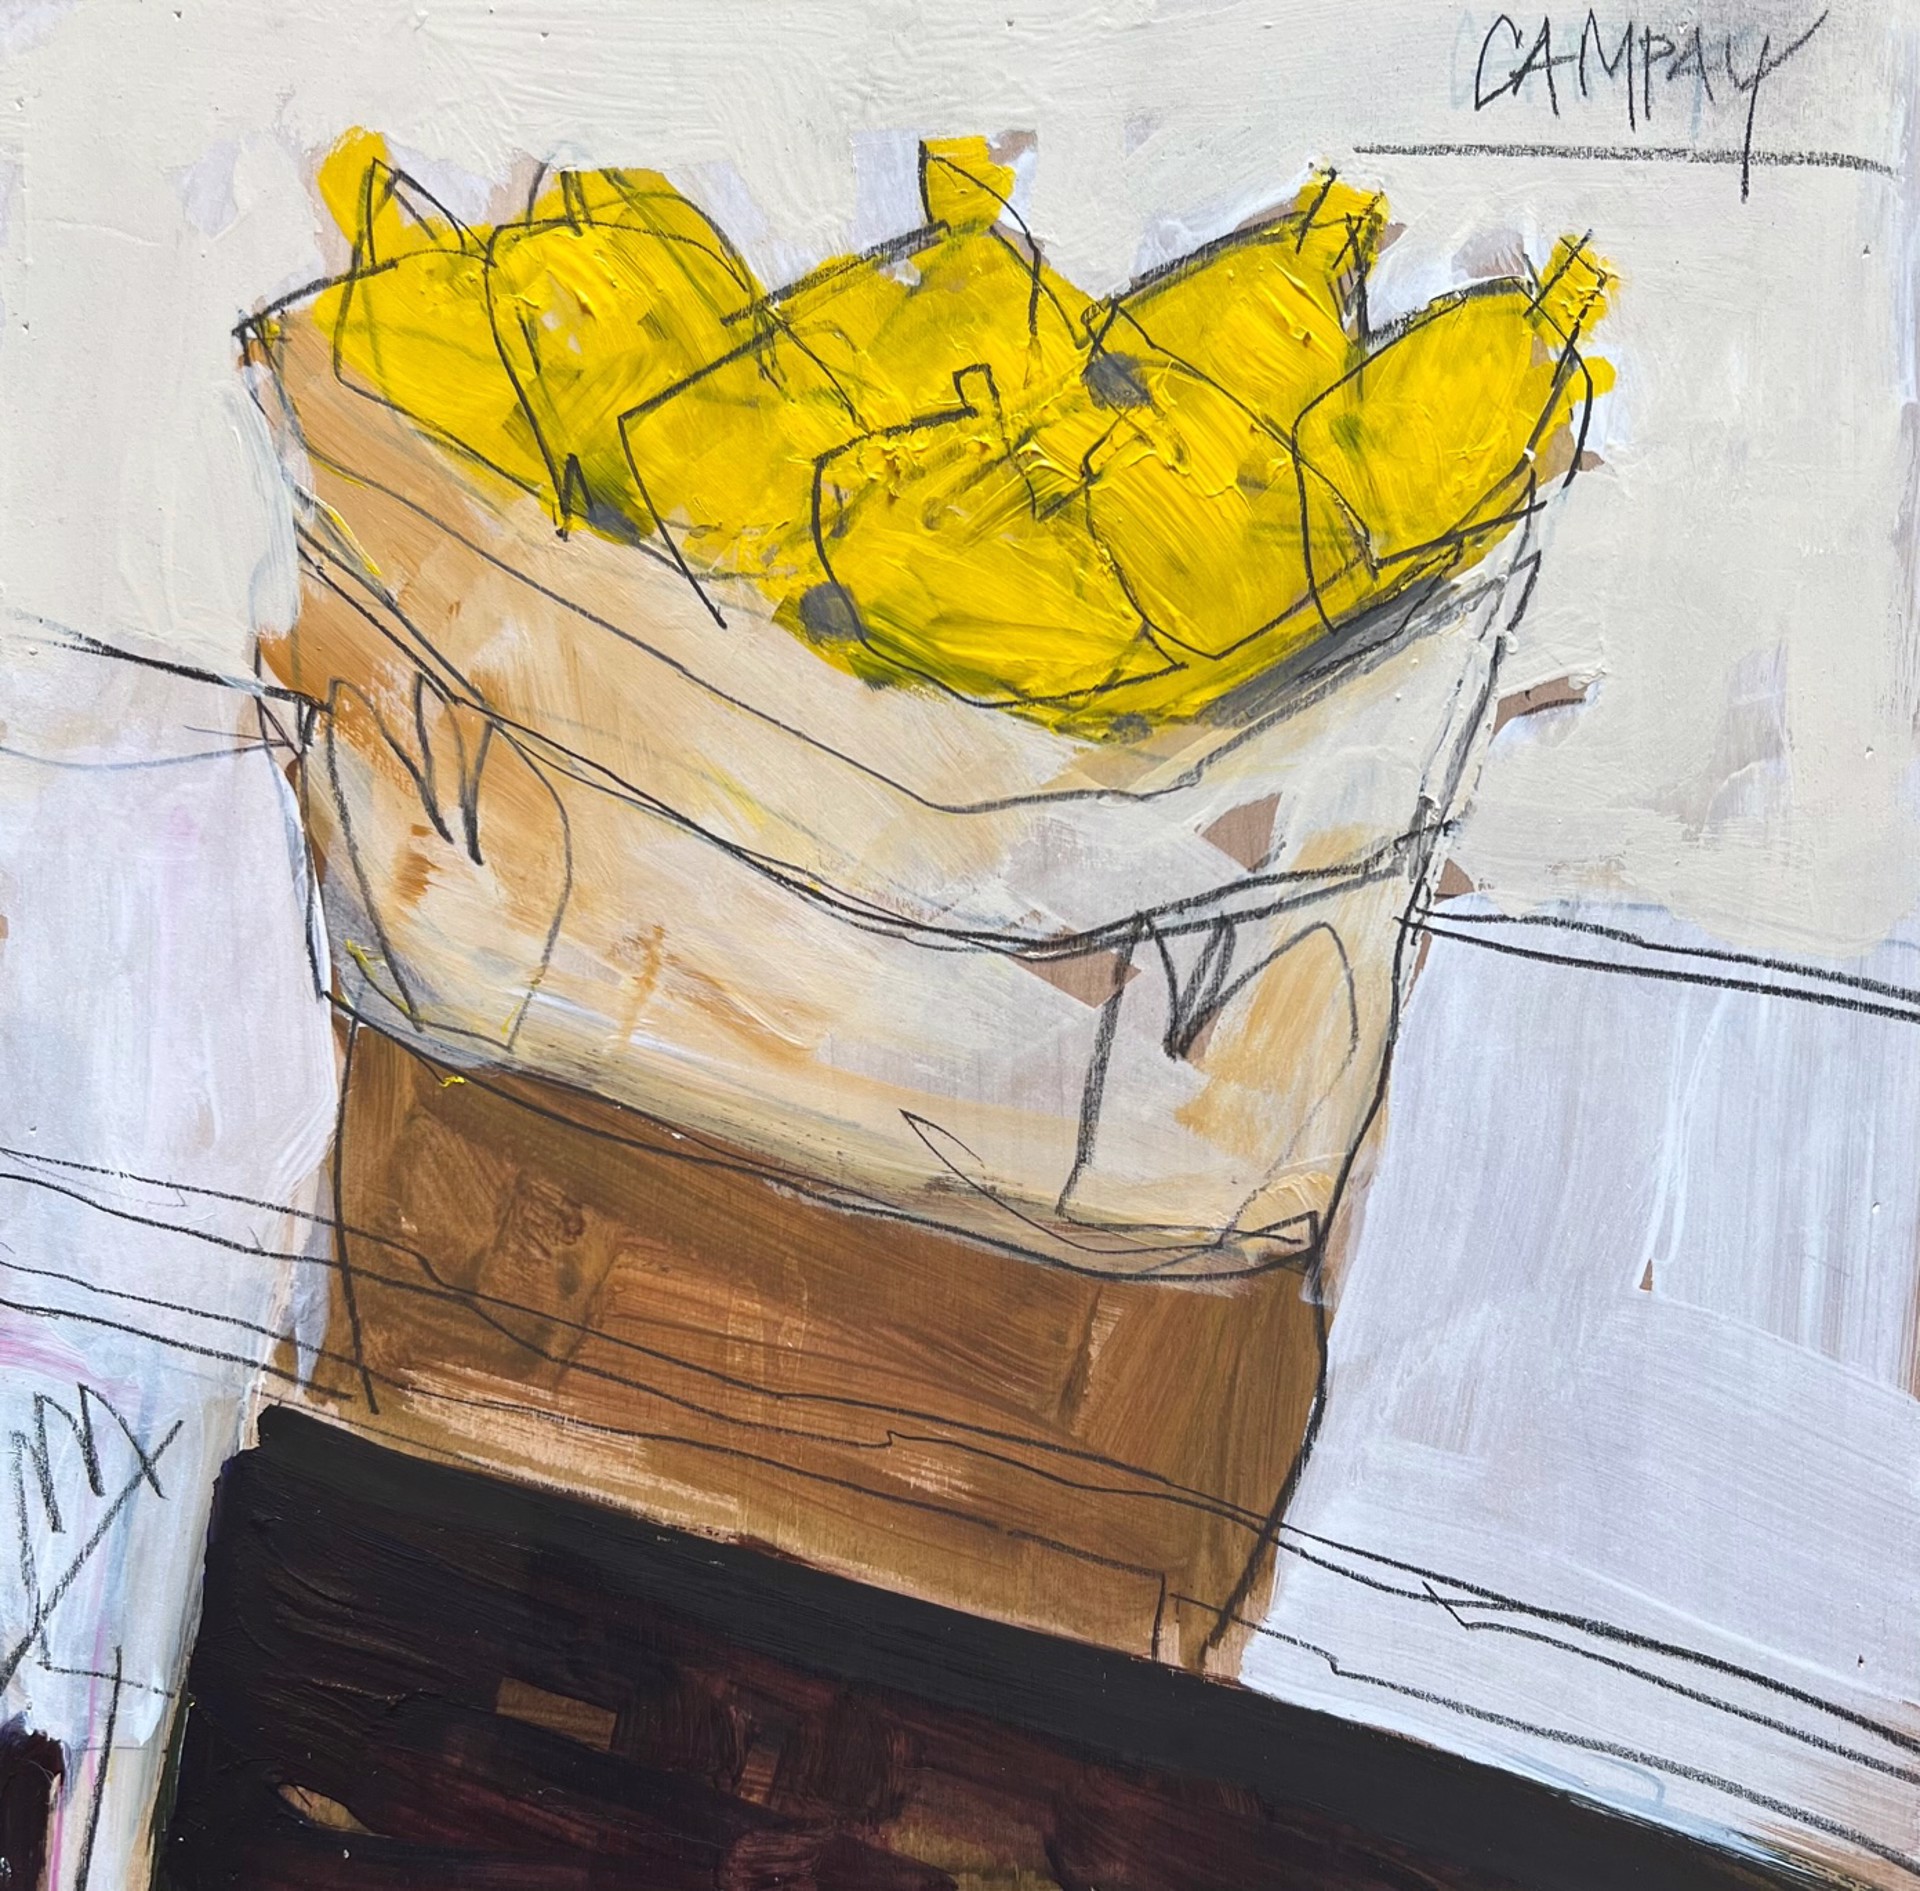 Lemons for Lunch by Dennis Campay